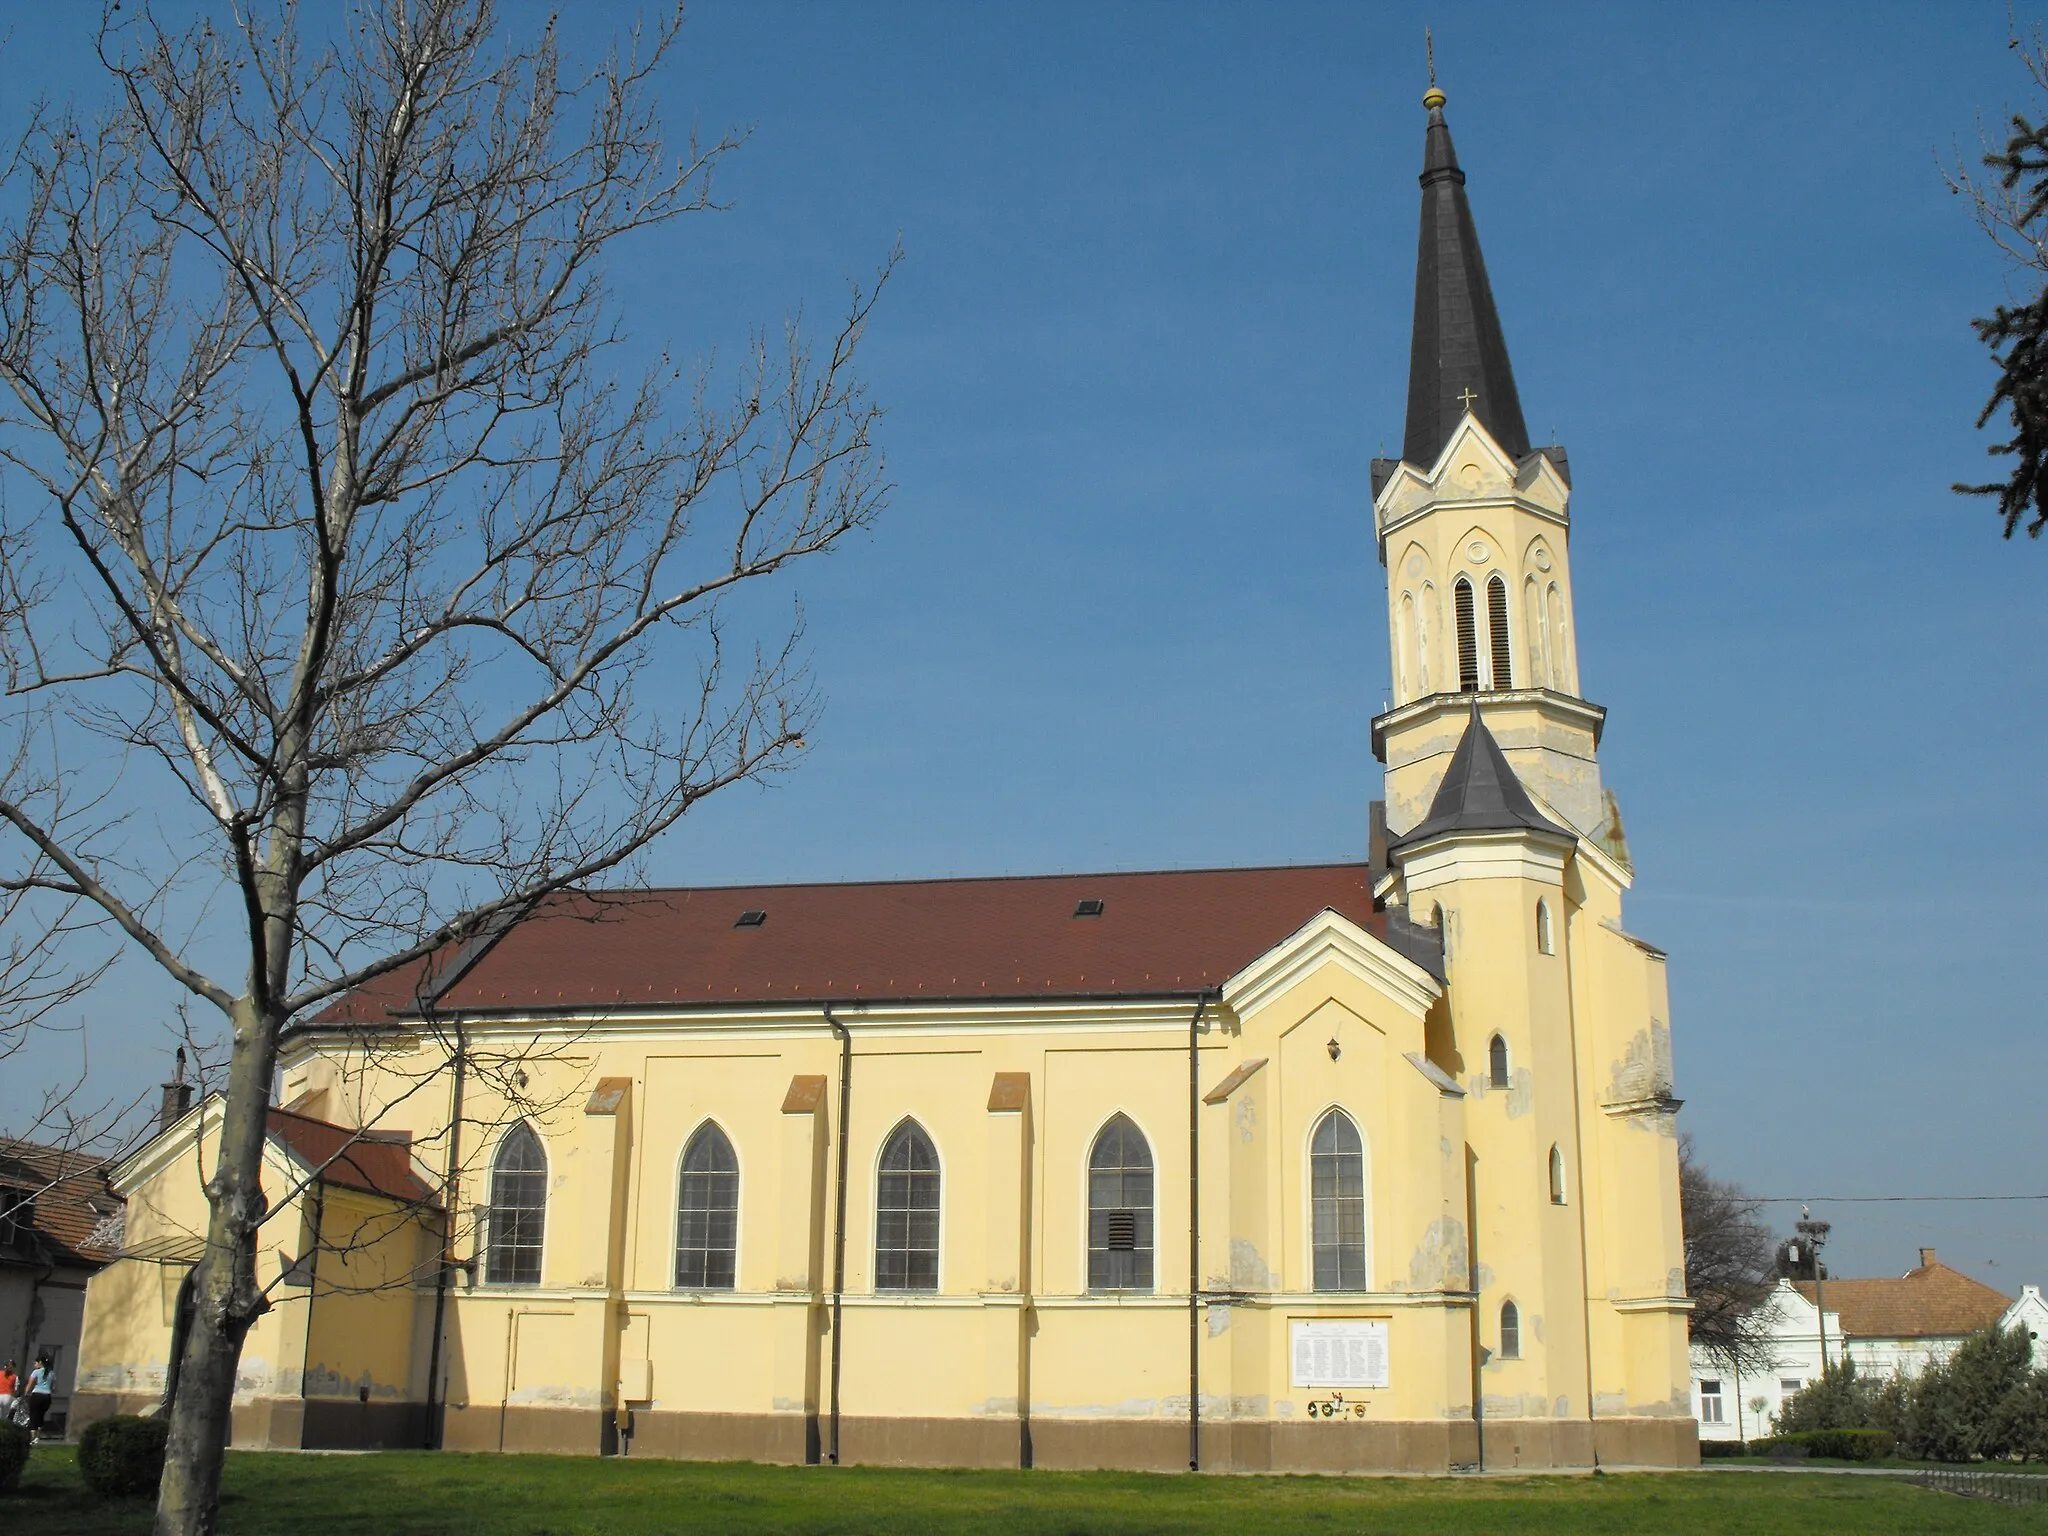 Photo showing: The Roman Catholic church of Maroslele, Hungary built in 1901 in neogothic style.